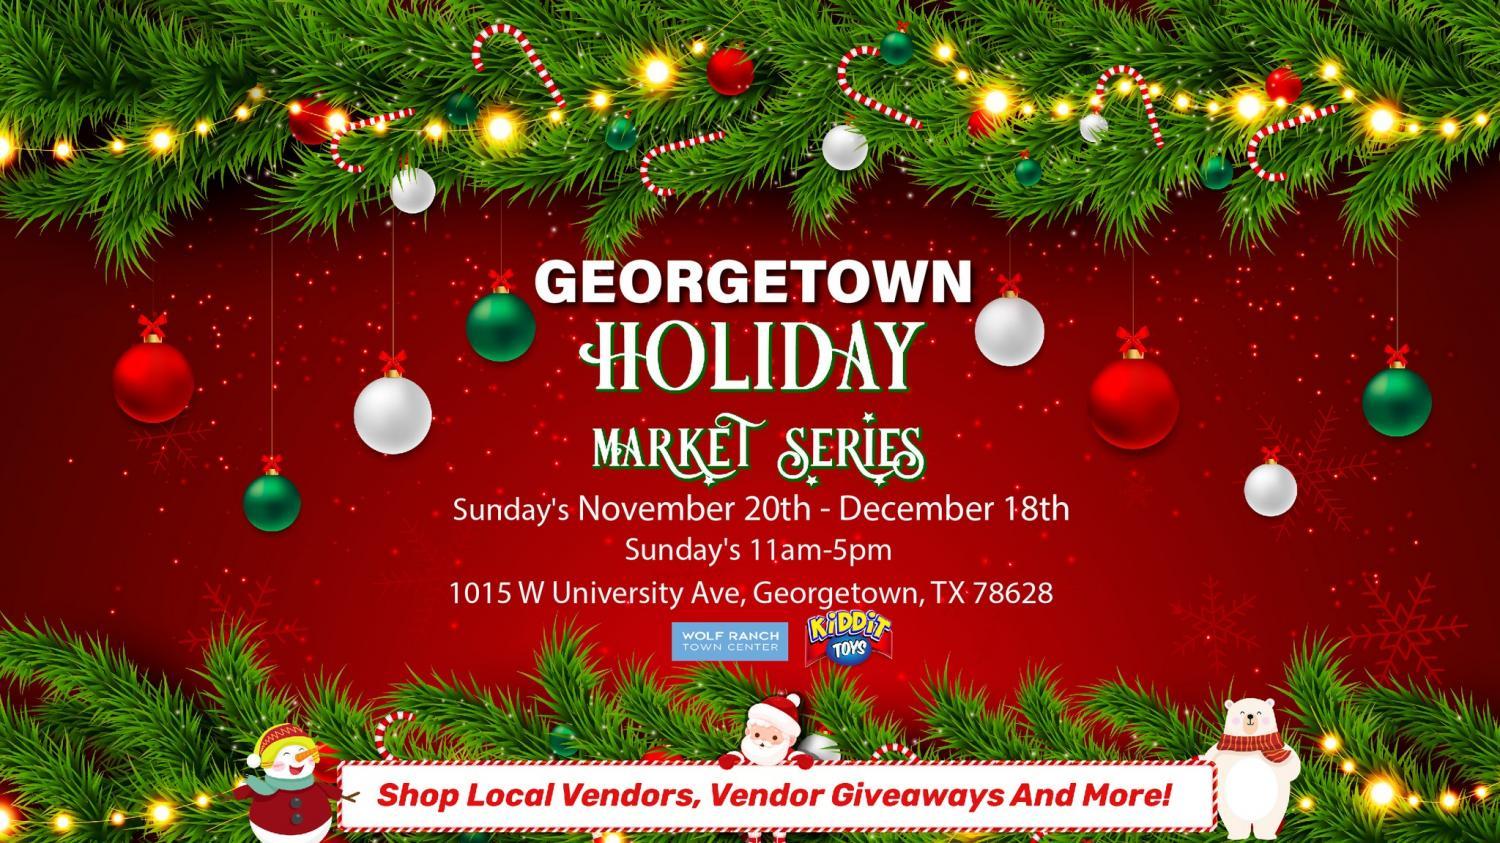 Holiday Market Series at Georgetown